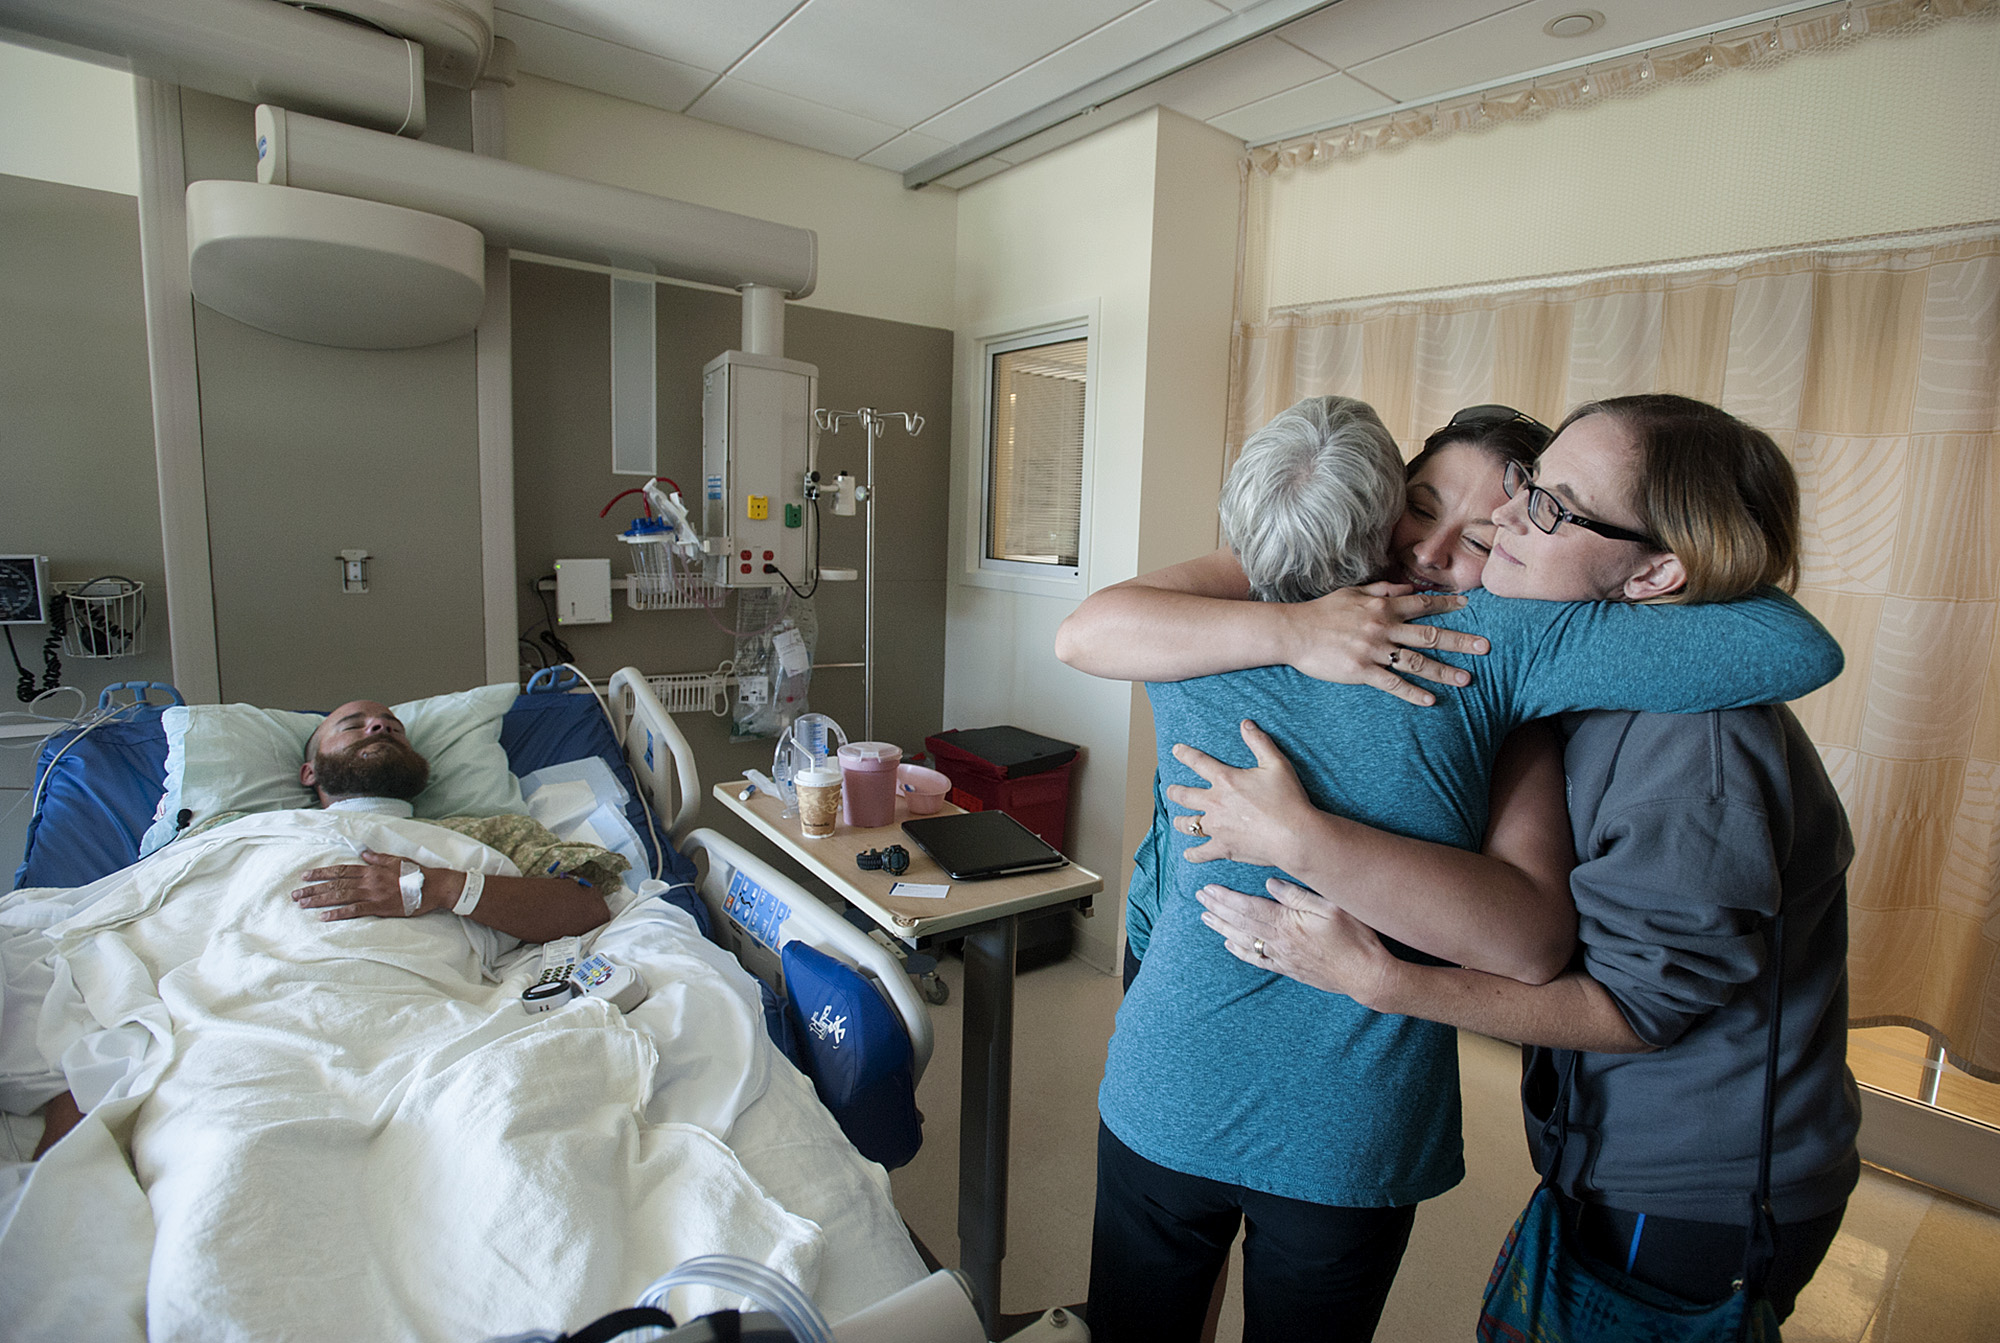 Scott Jensen of Amboy rests in his hospital bed in July as his mom, Therese Jensen, with back to camera, thanks the women who helped save his life, Hiedi Poulson of Brush Prairie, from left, and Kim Detter of Battle Ground, far right, at PeaceHealth Southwest Medical Center. The Columbian's Amanda Cowan received a runner-up certificate from the Society of Professional Journalists for the photo.